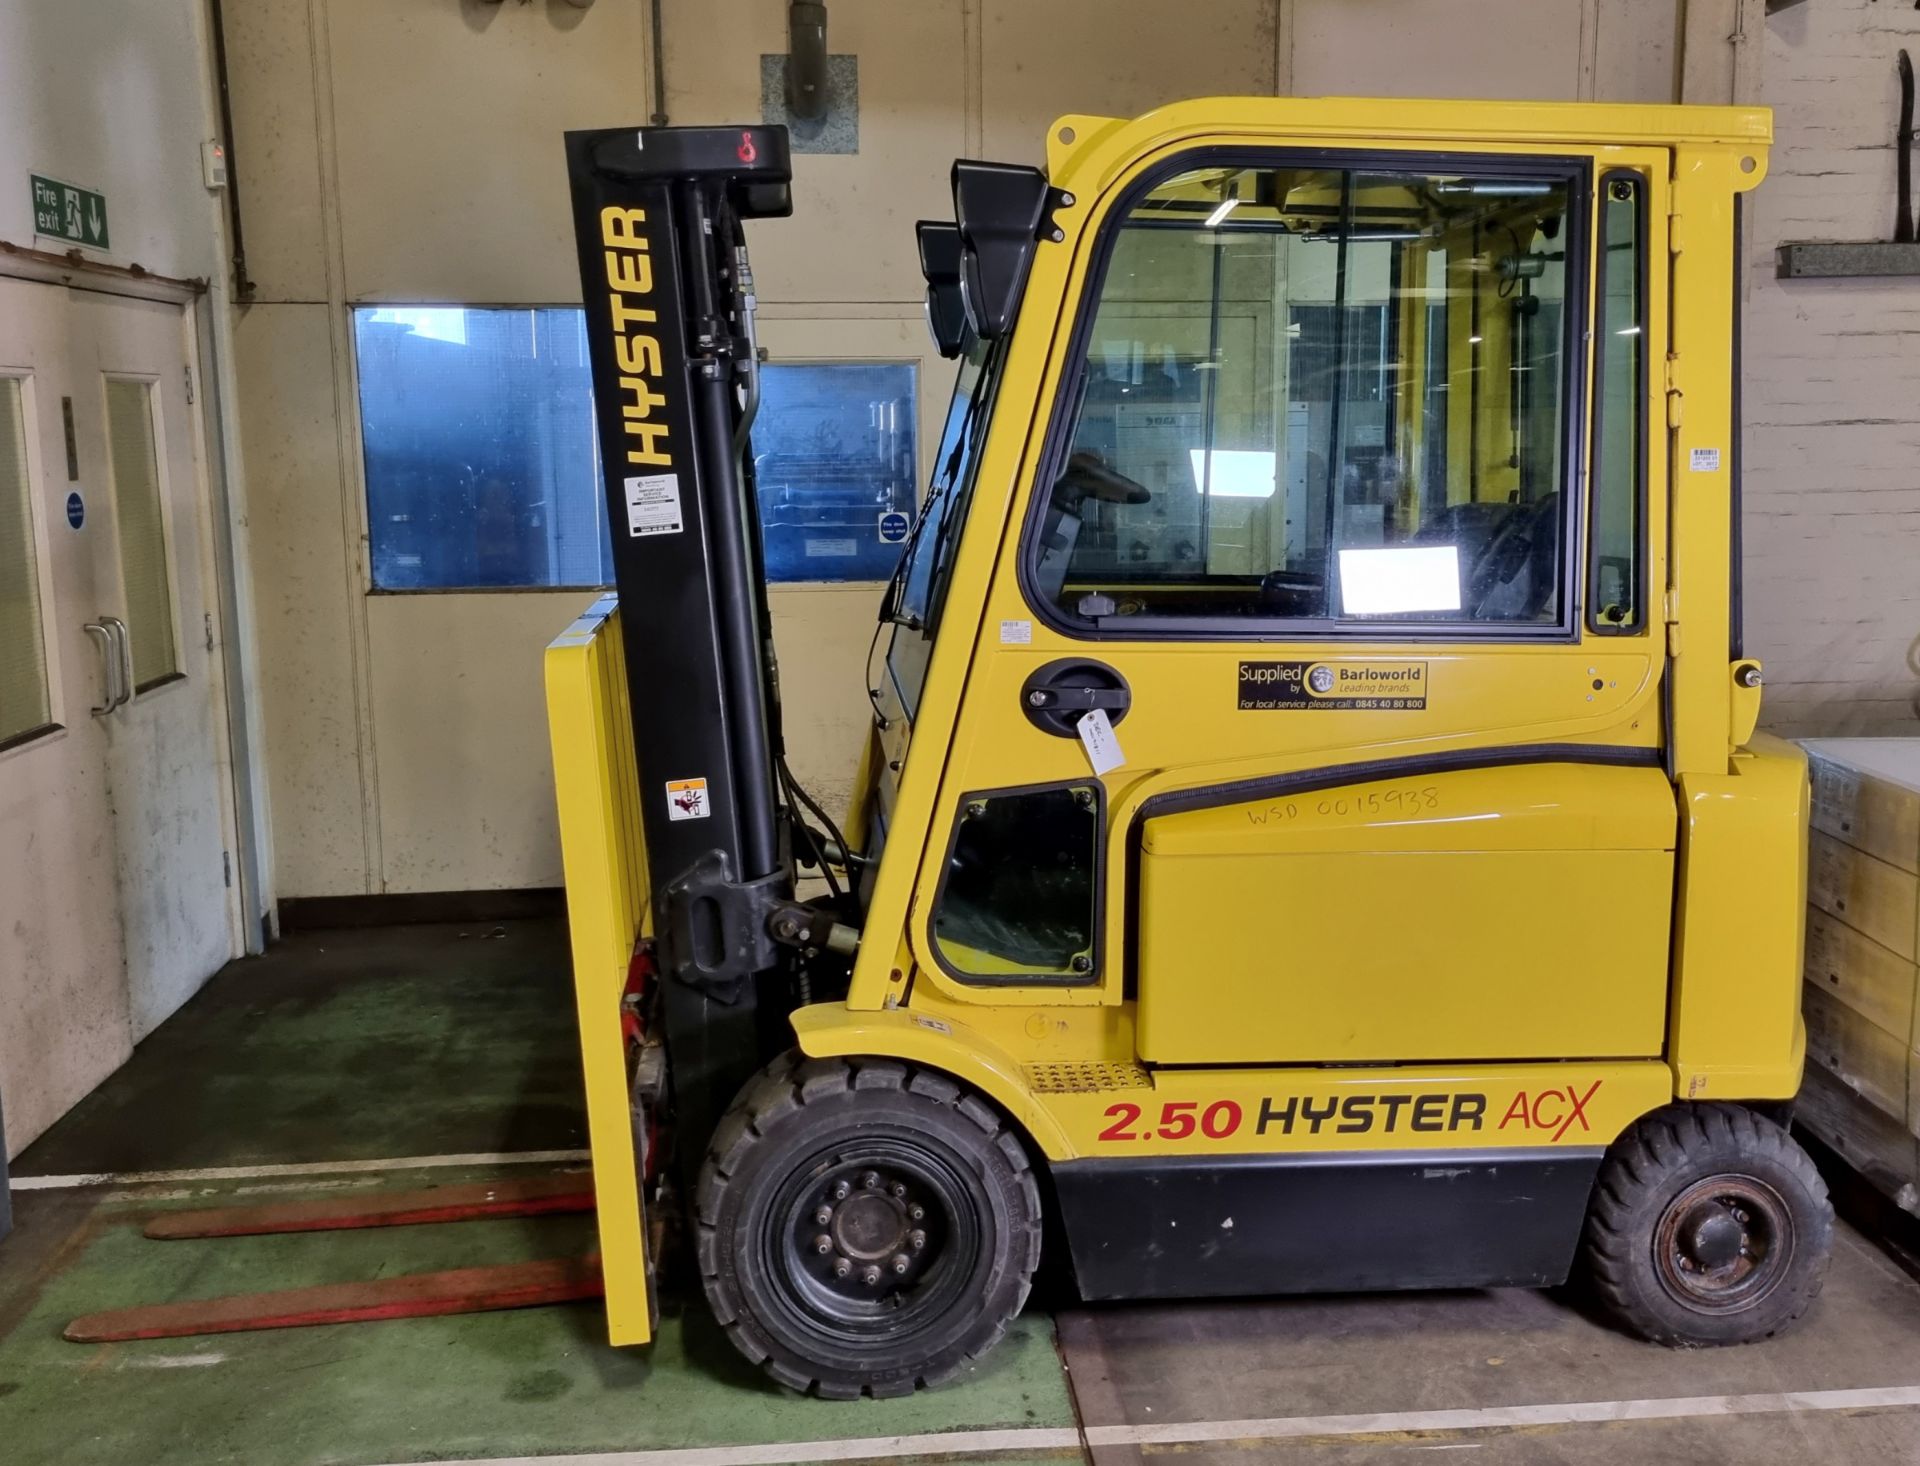 Hyster ACX J2.50XM-717 4-wheel electric forklift truck - full details in the description